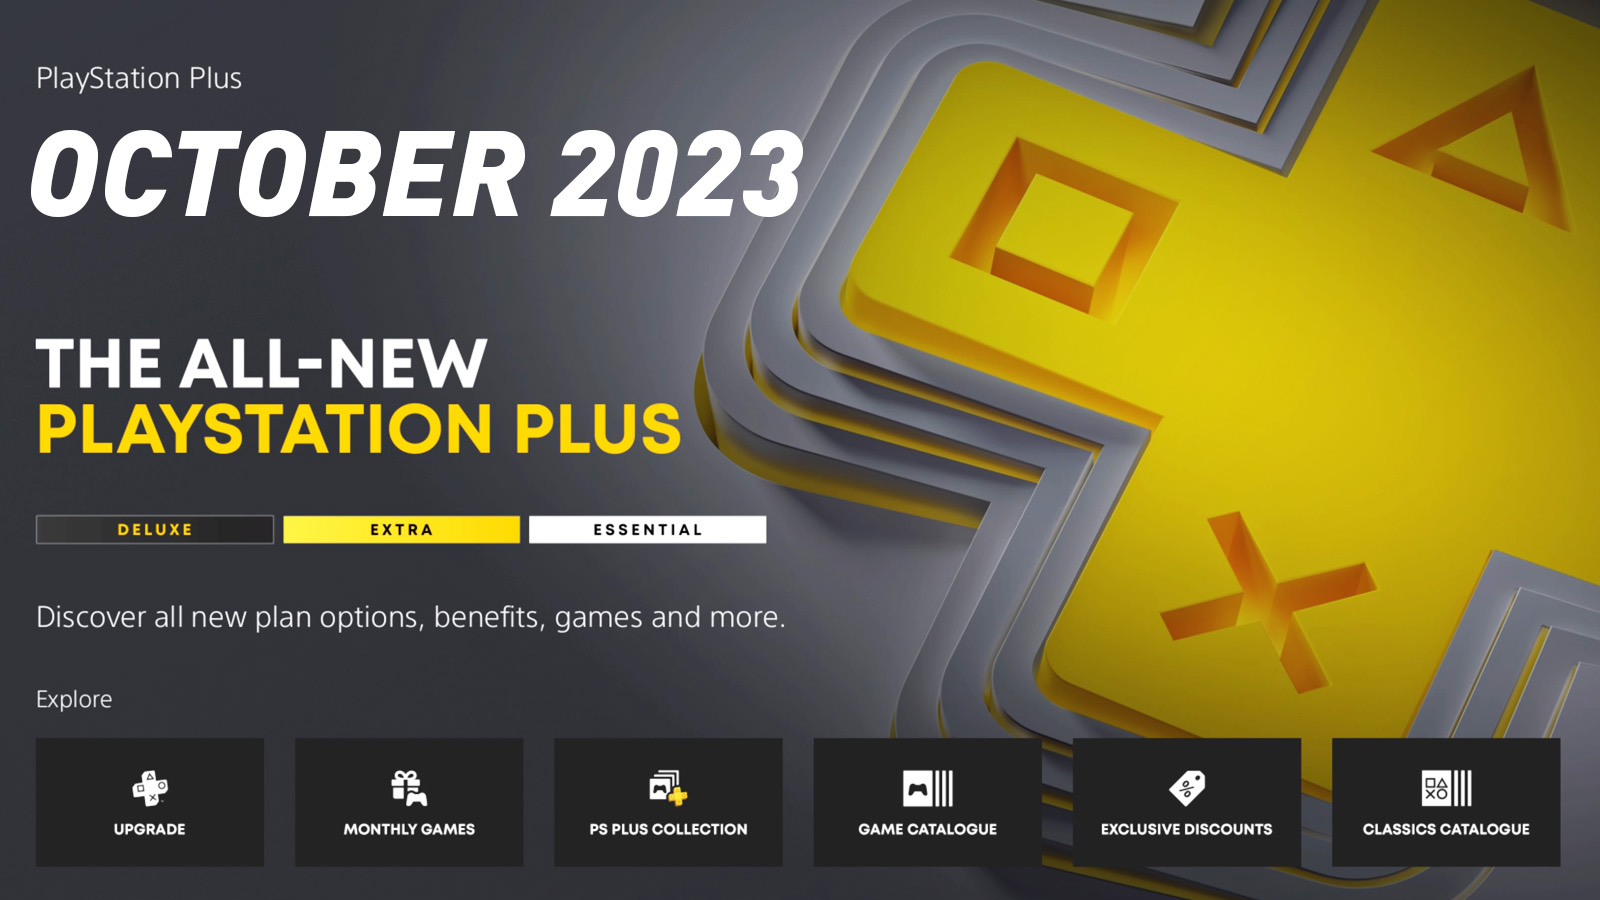 PlayStation Plus Free Games - October 2023